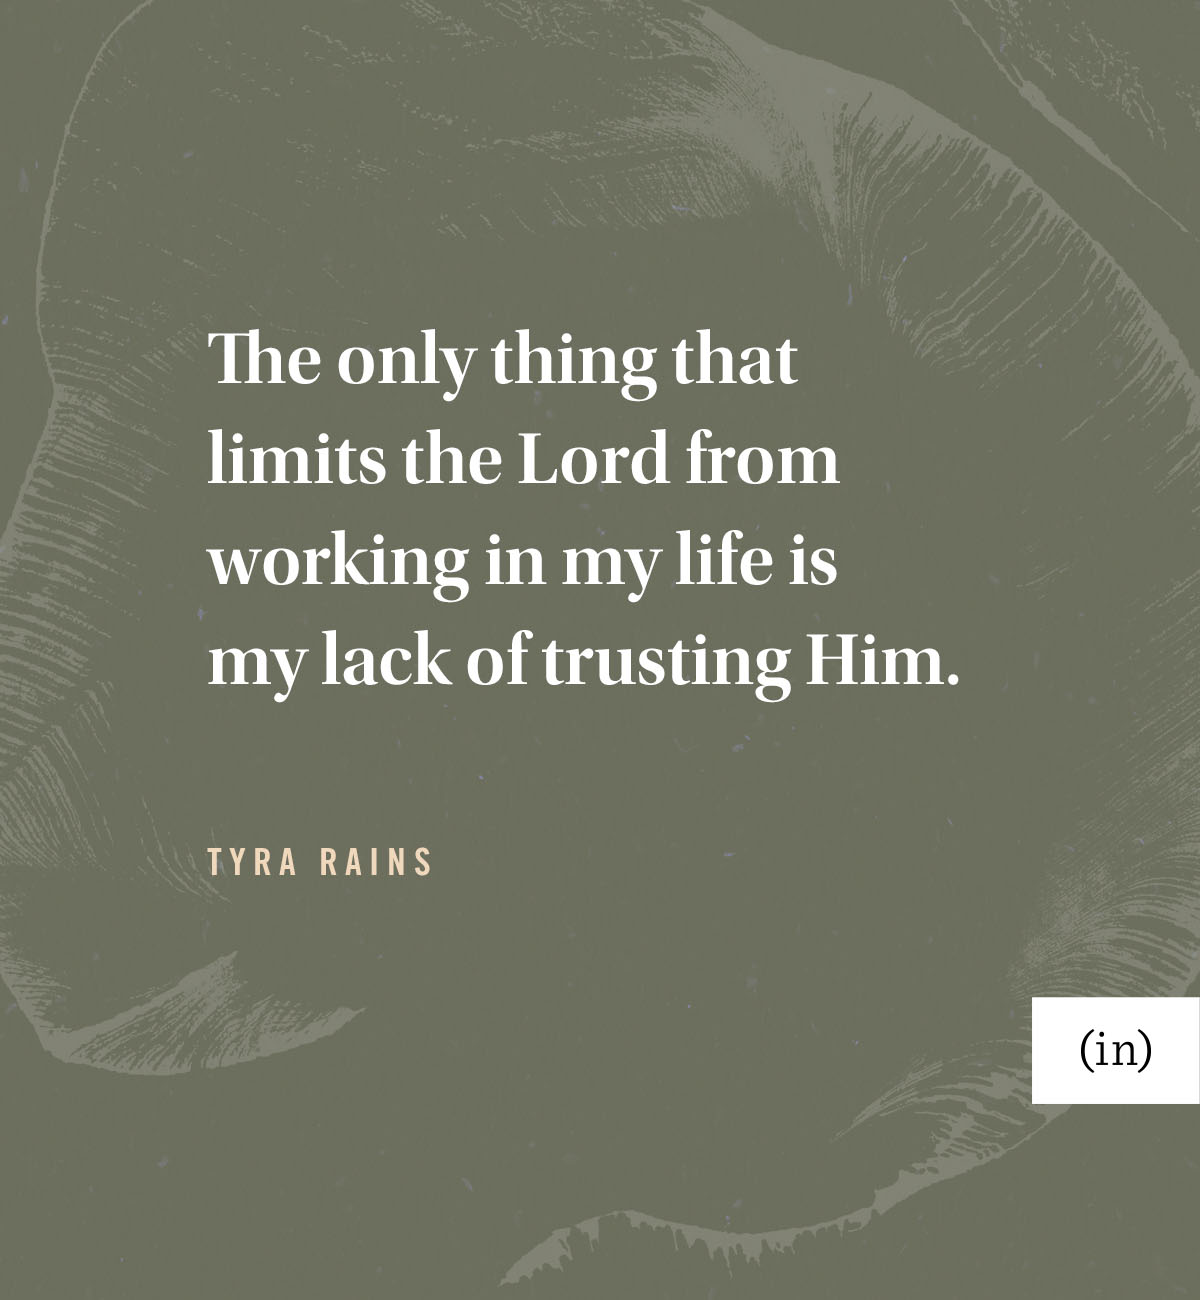 The only thing that limits the Lord from working in my life is my lack of trusting Him. -Tyra Rains